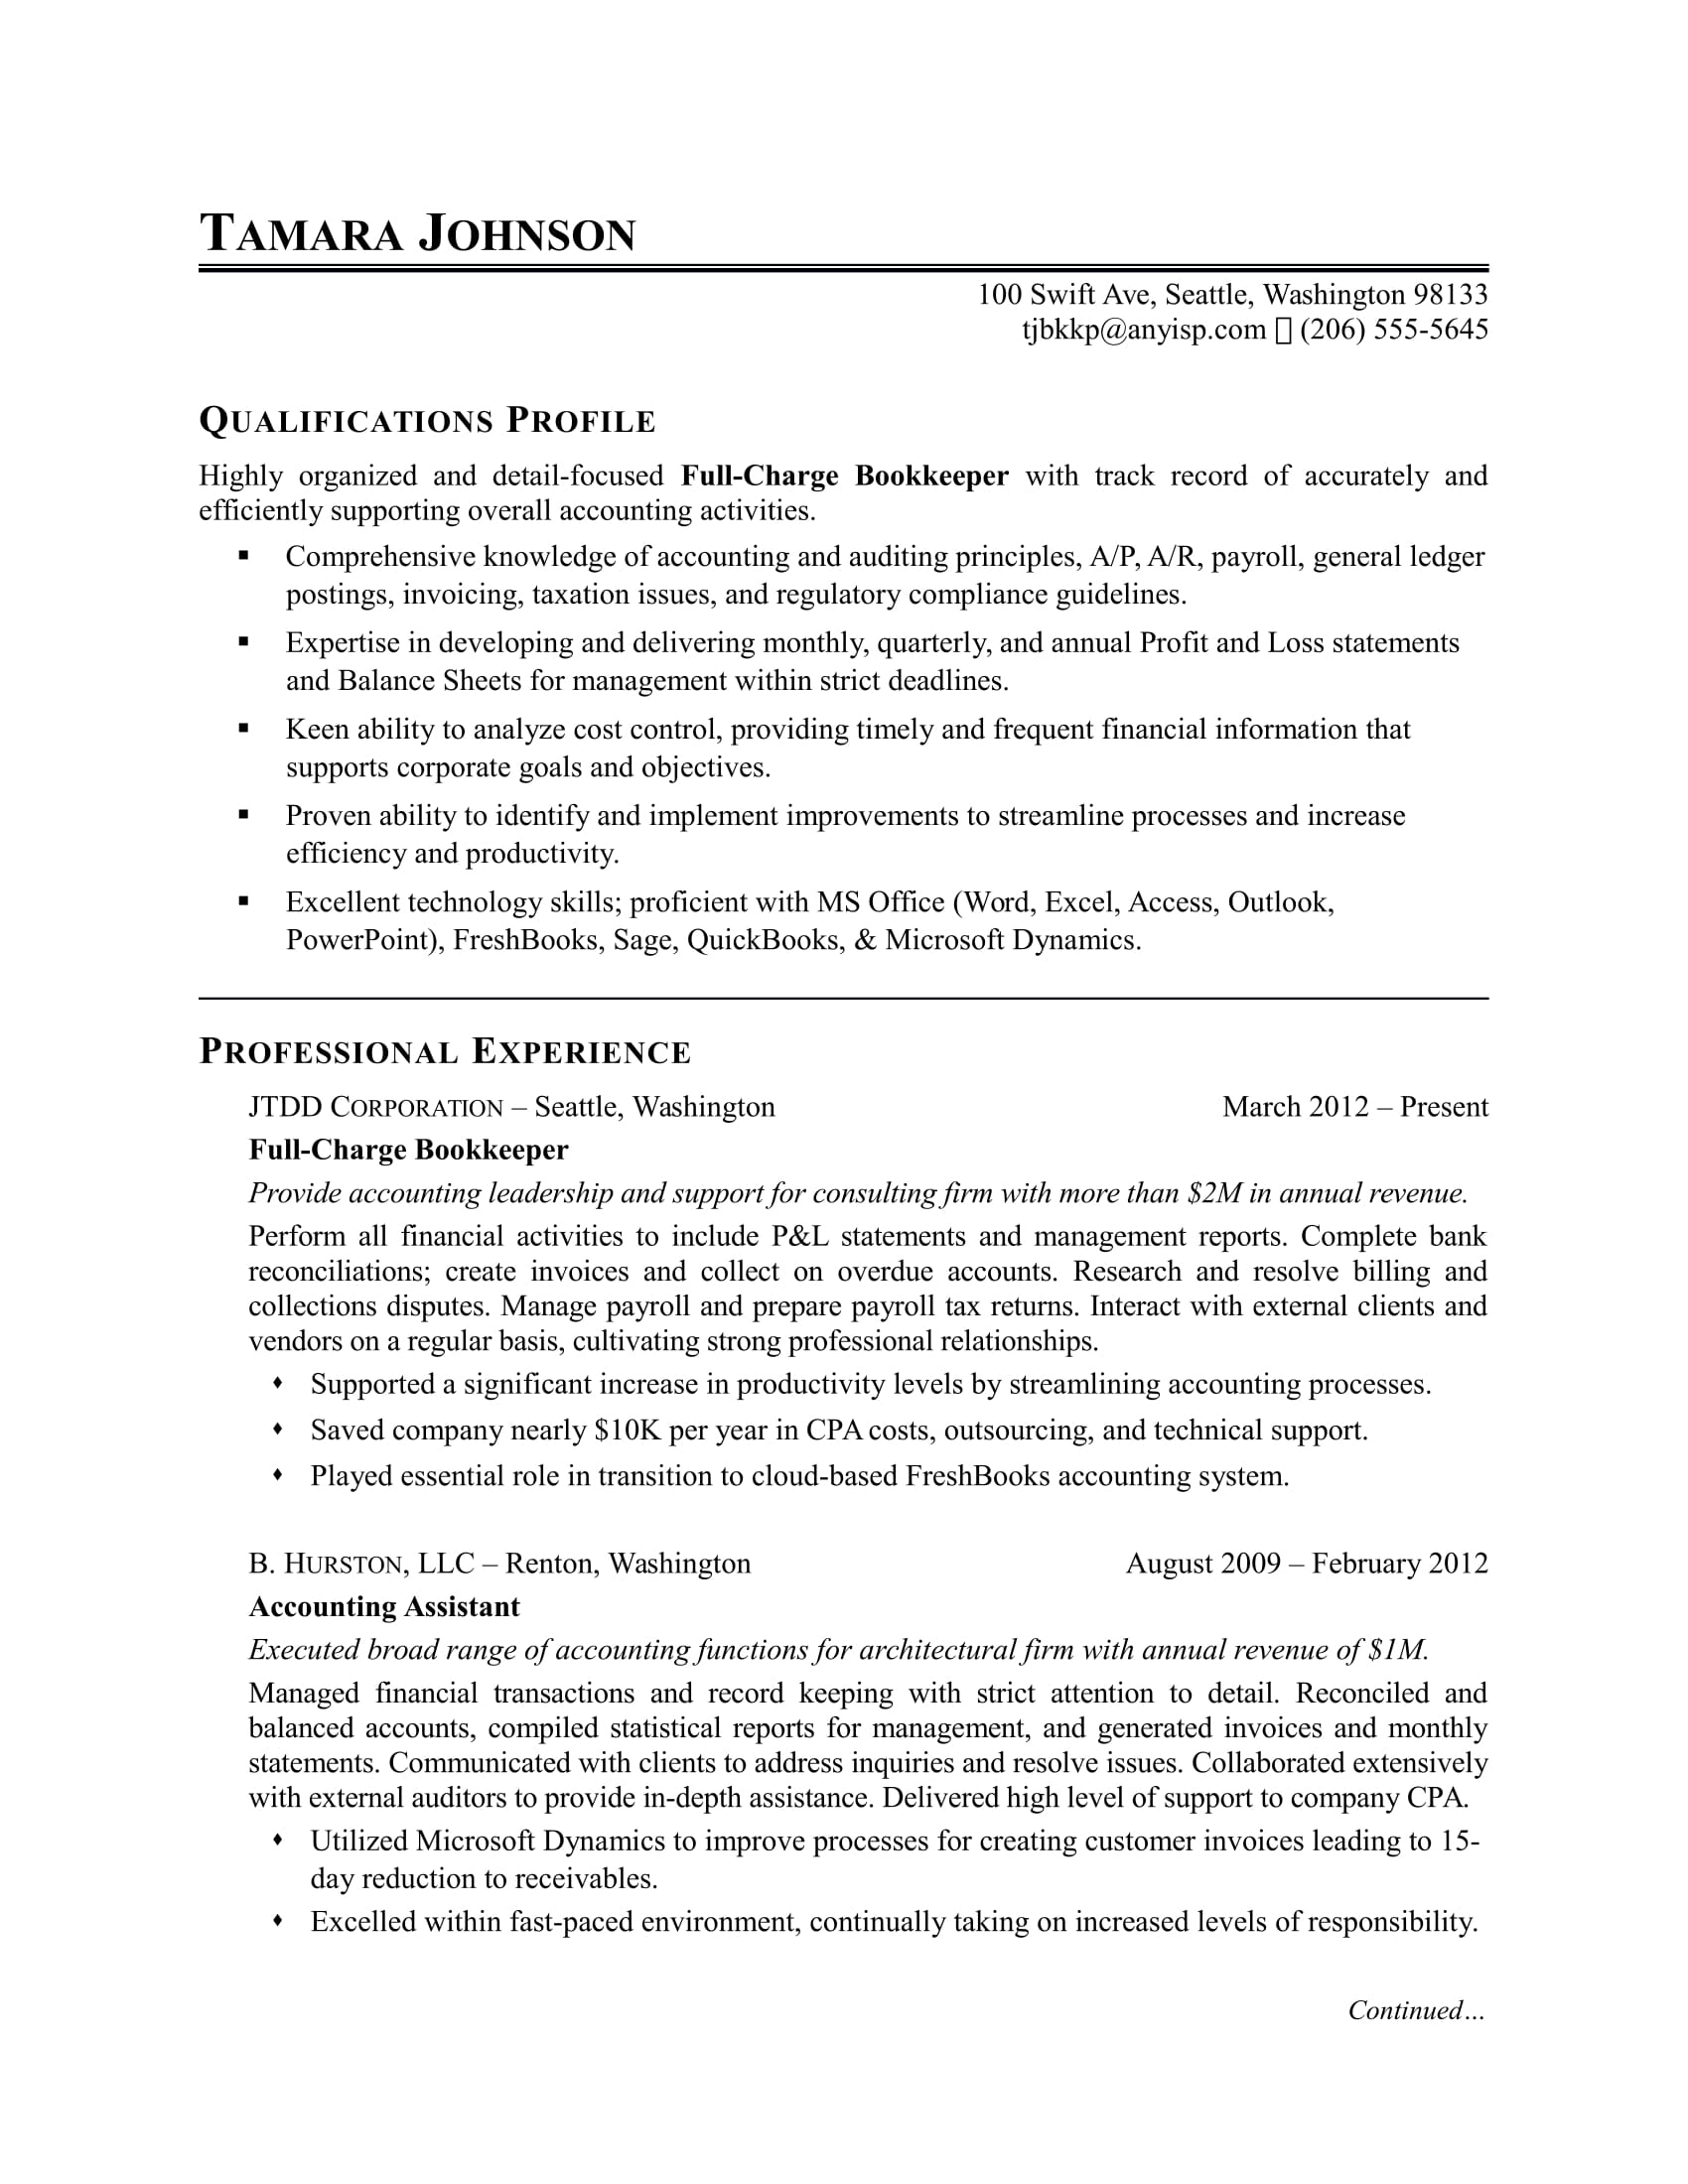 Bookkeeper Resume Sample | Monster With Bookkeeping Reports Samples